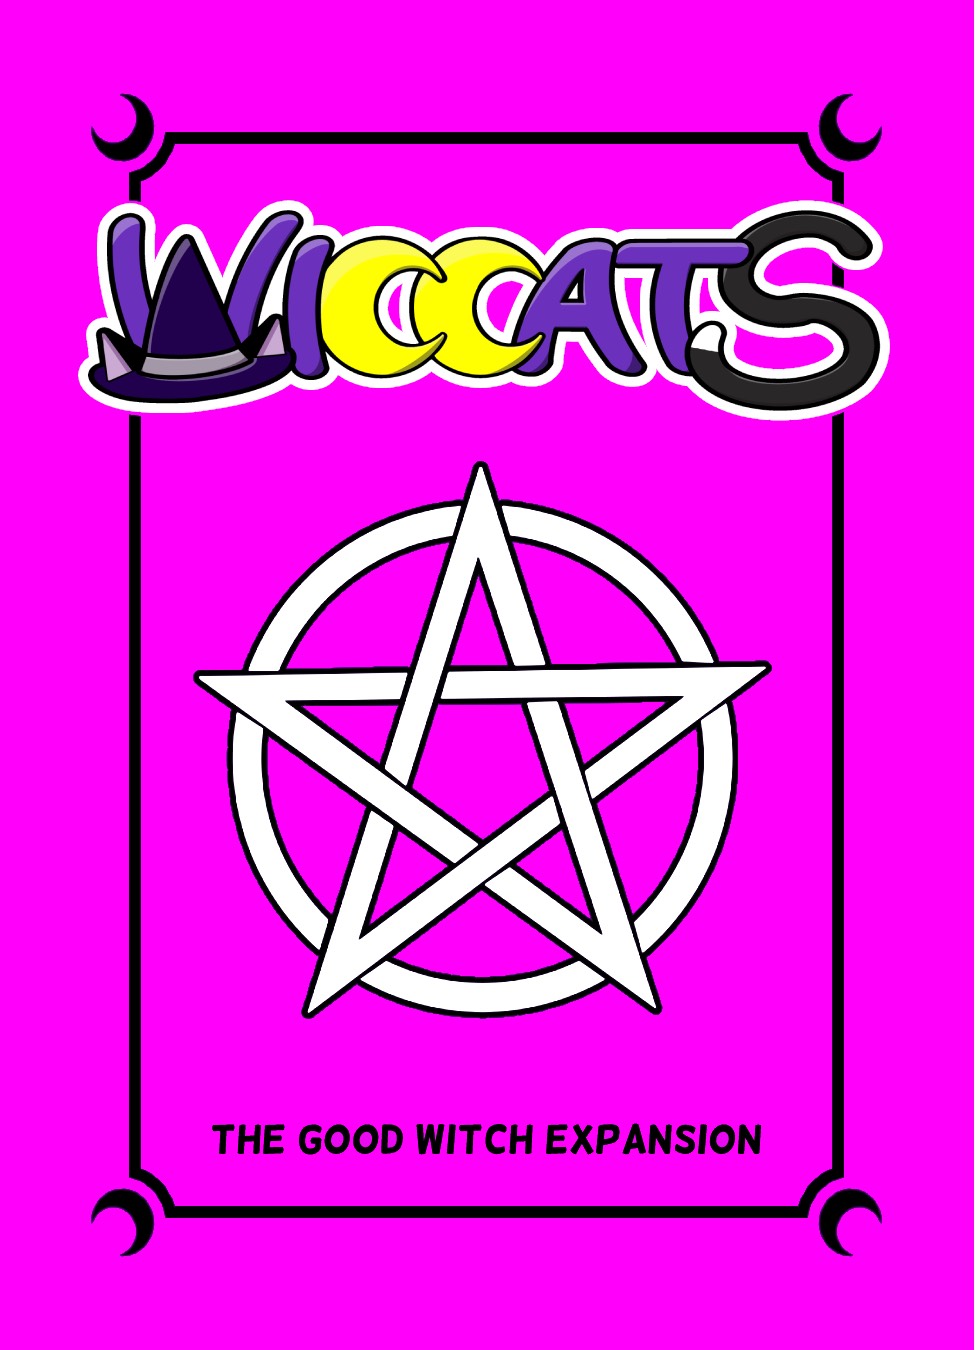 Wiccats Good Witch